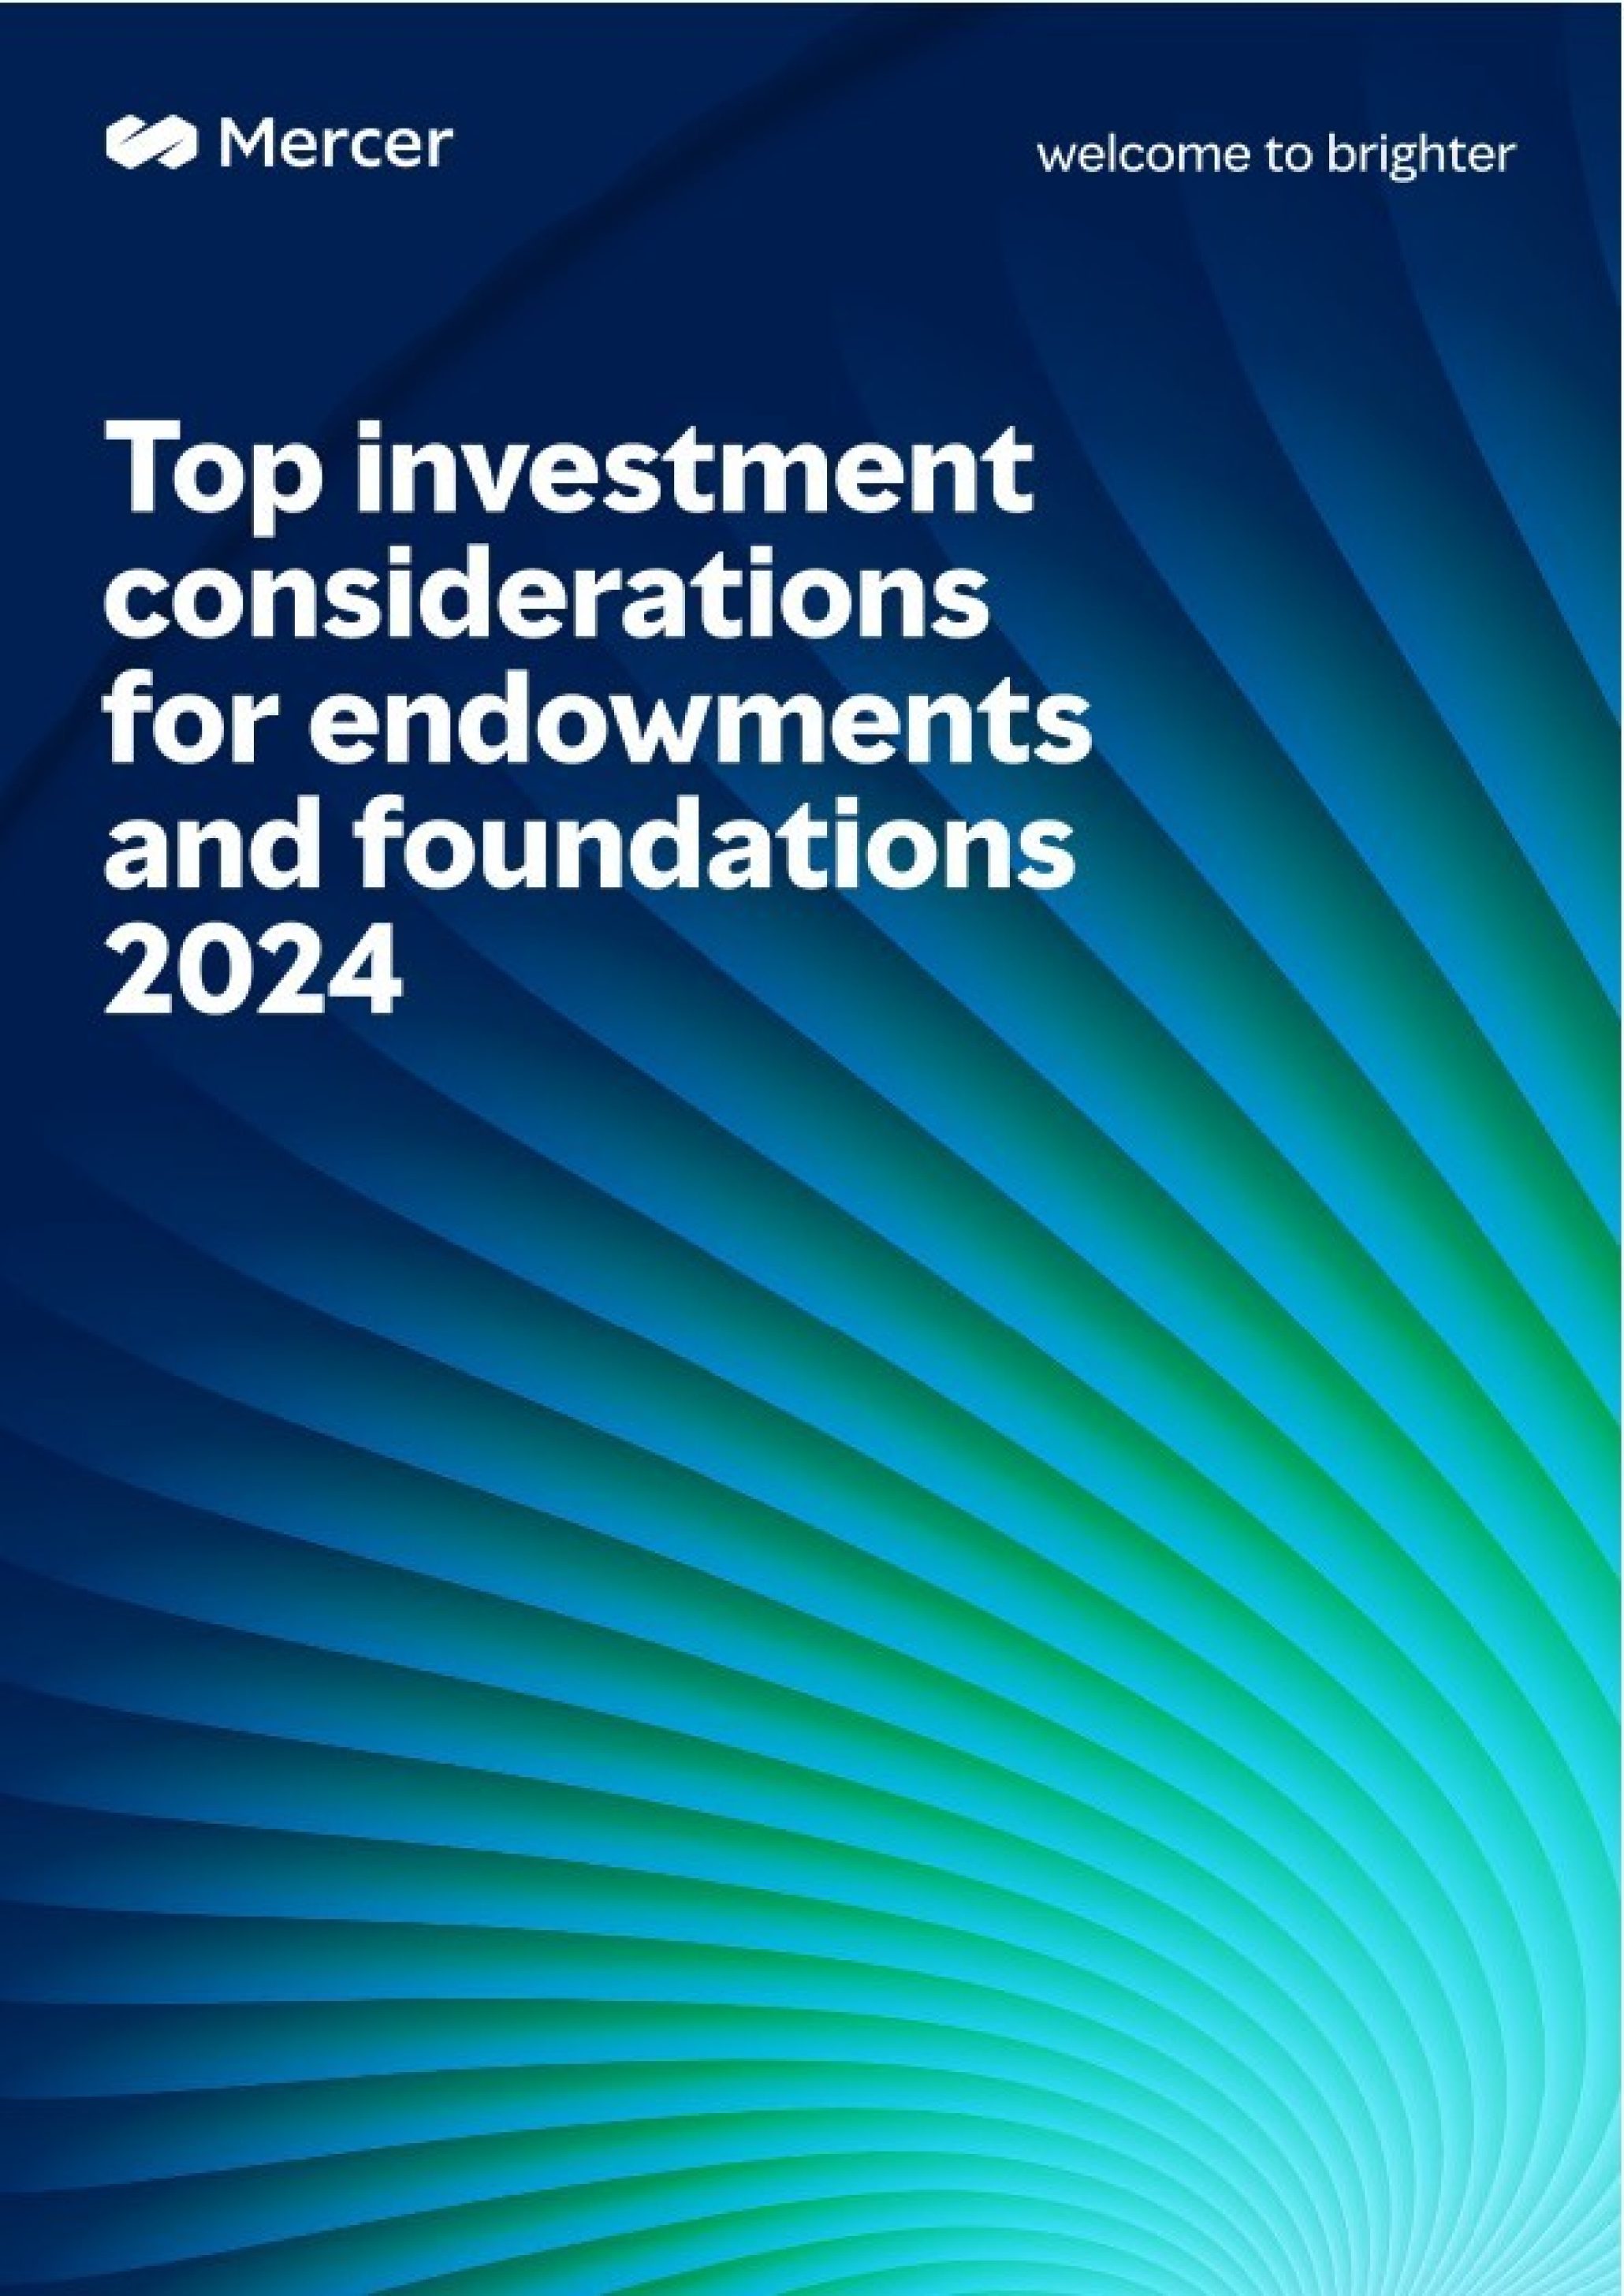 Top investment considerations for endowments and foundations 2024